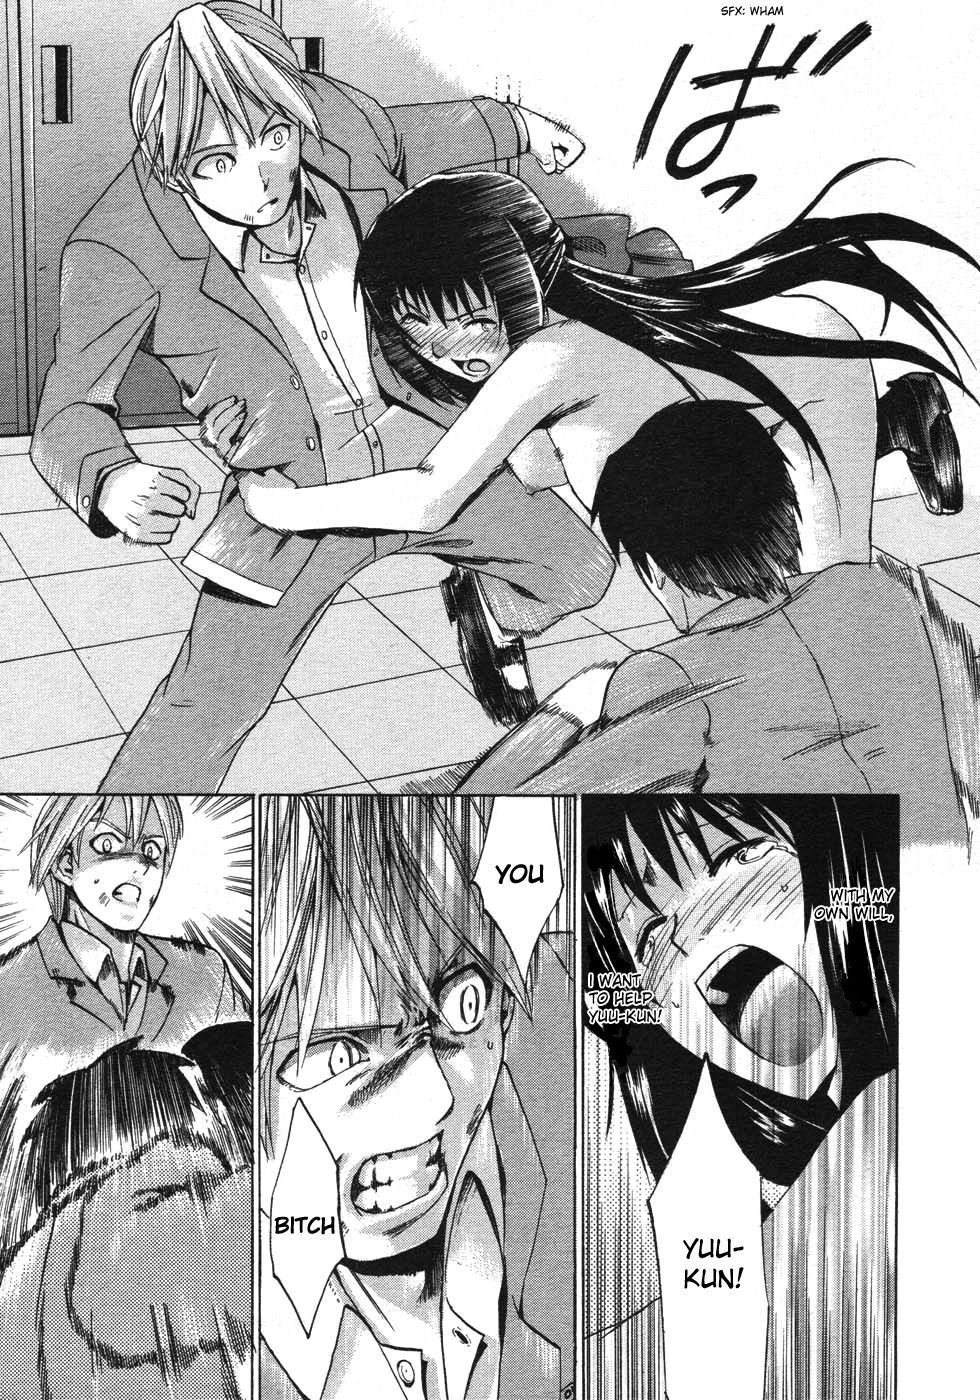 When you let go of my hands 78 hentai manga